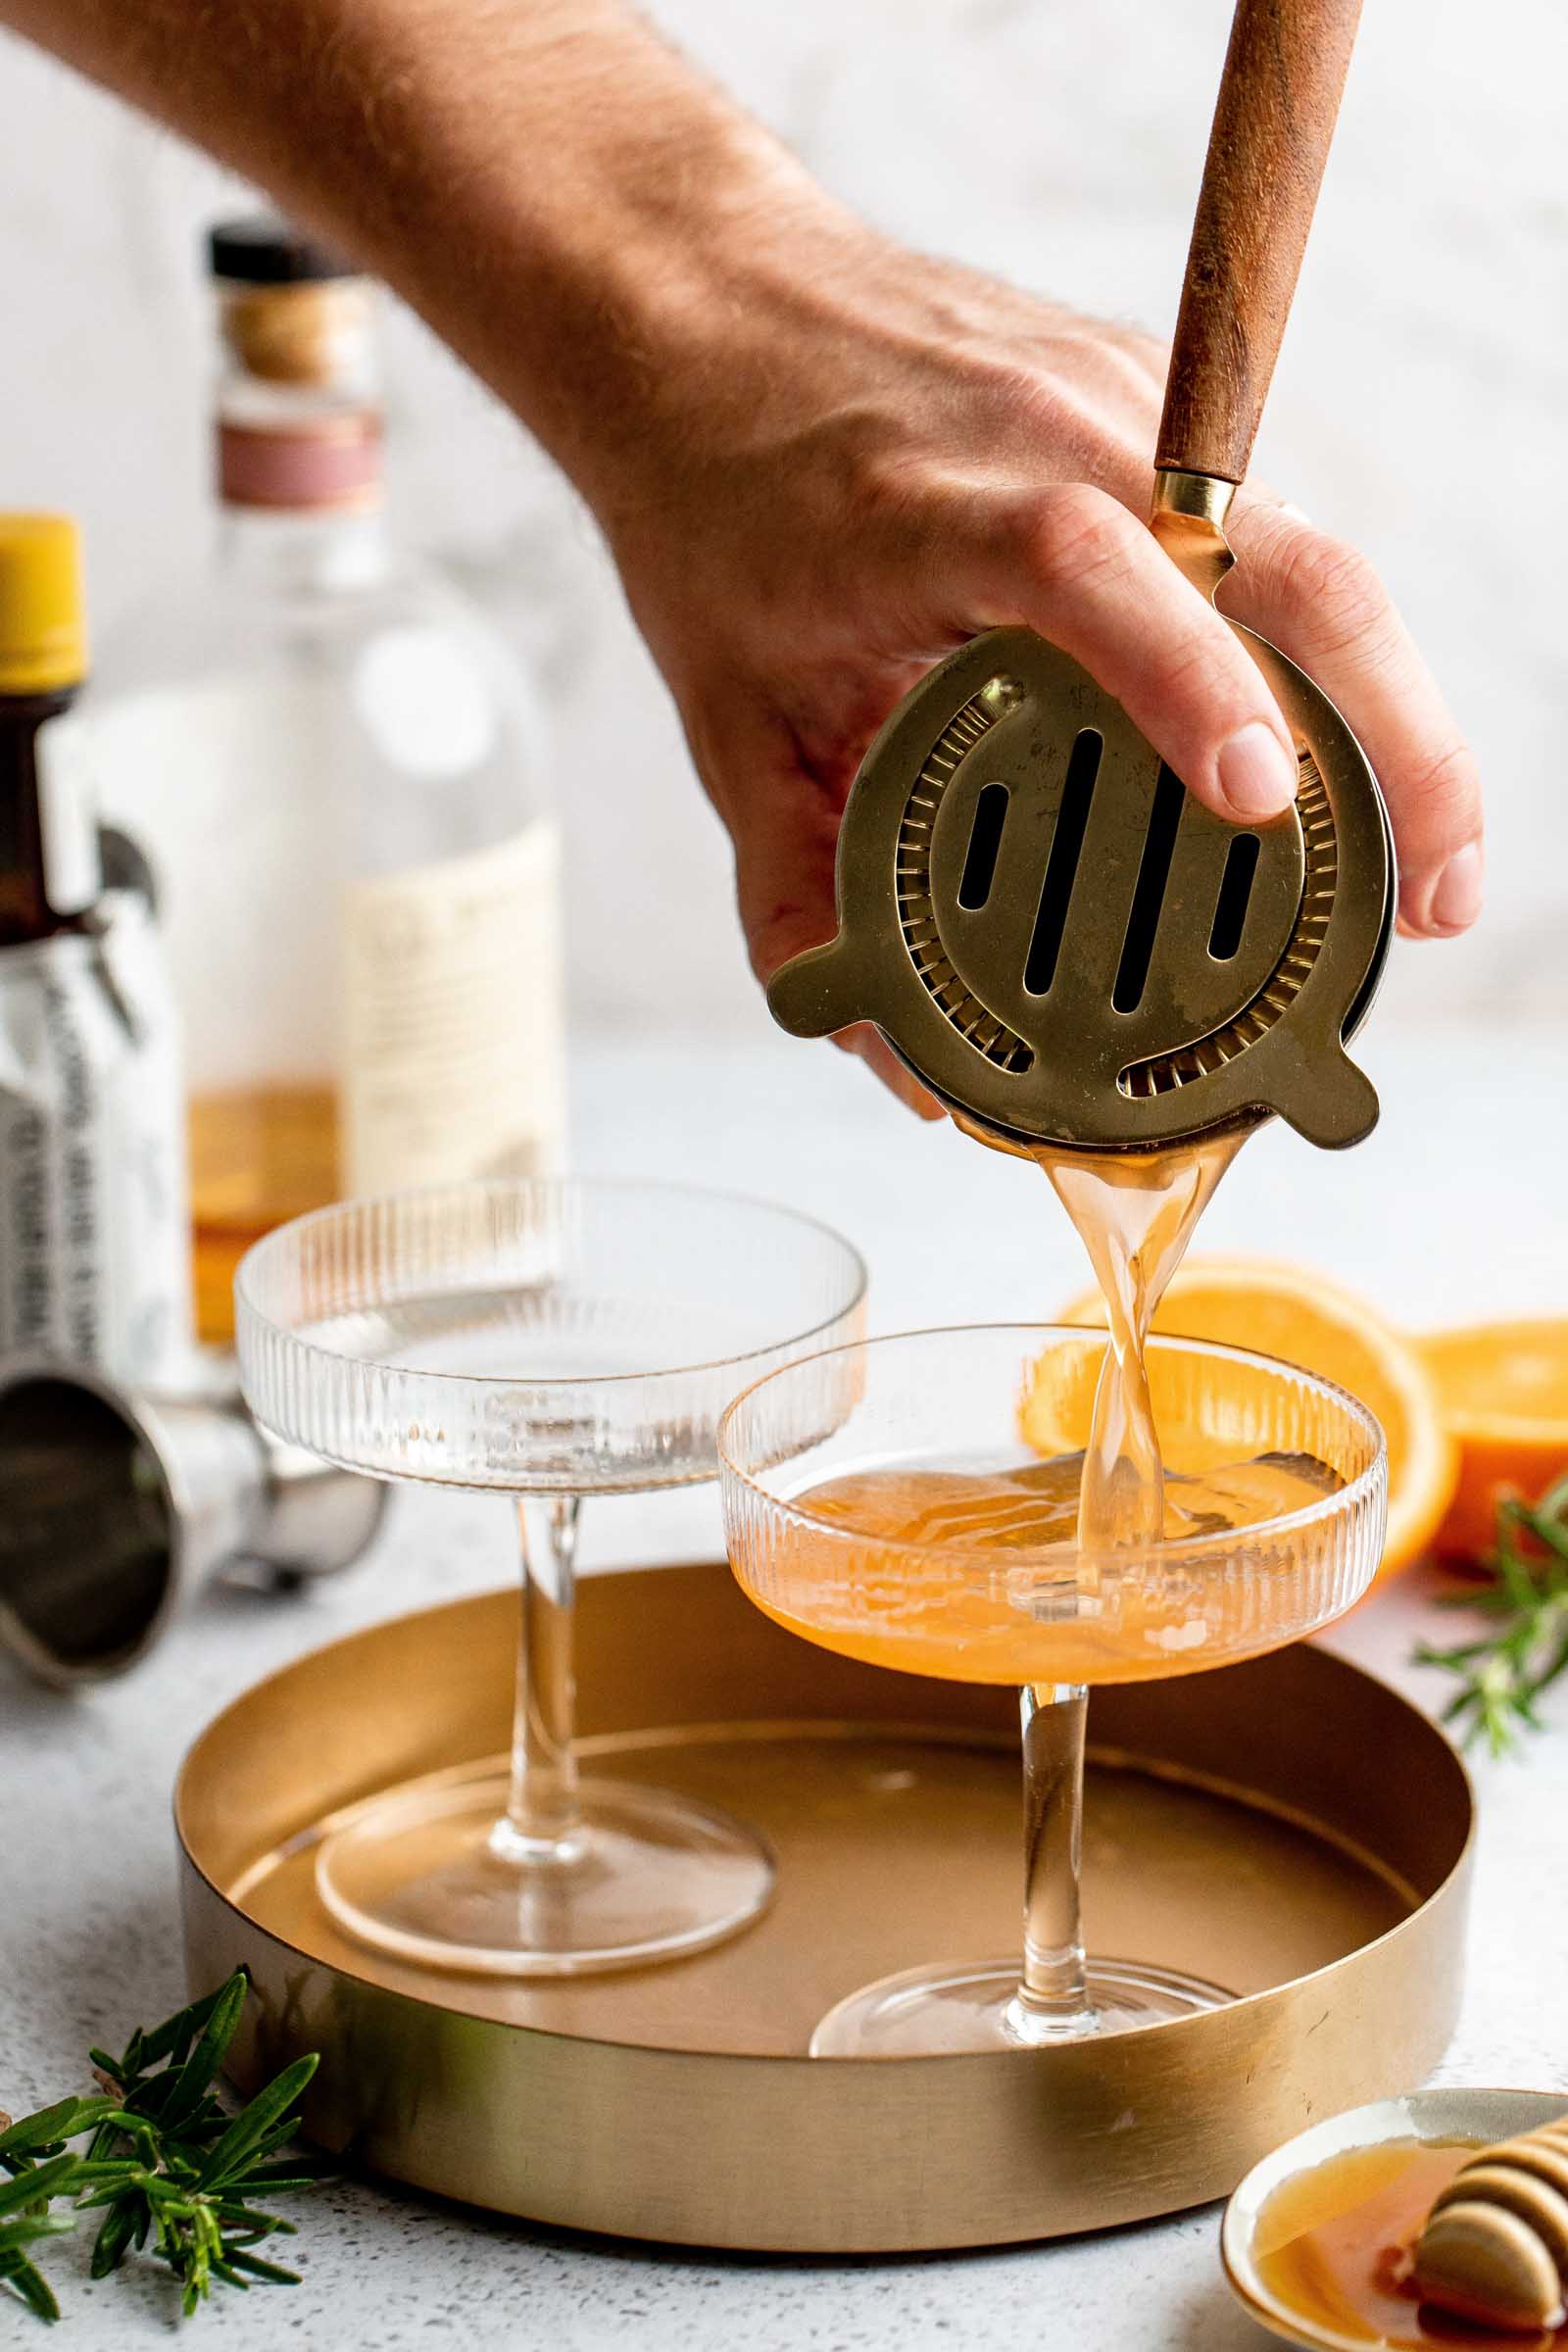 Hand straining cocktail into glass with cocktail strainer.